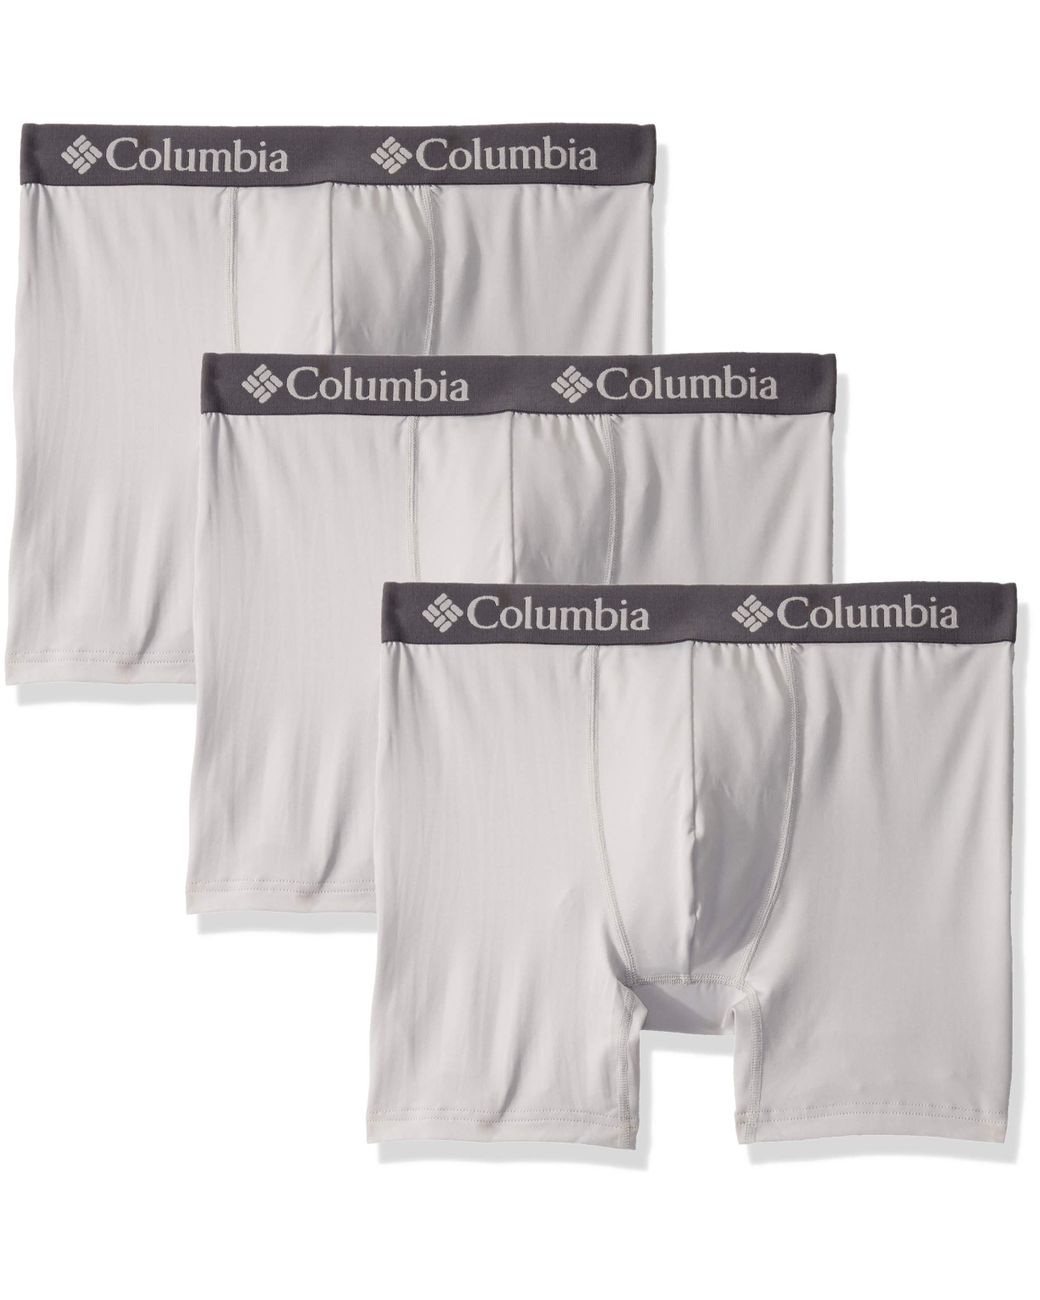 Columbia Cotton Boxer Brief in Gray for Men - Lyst